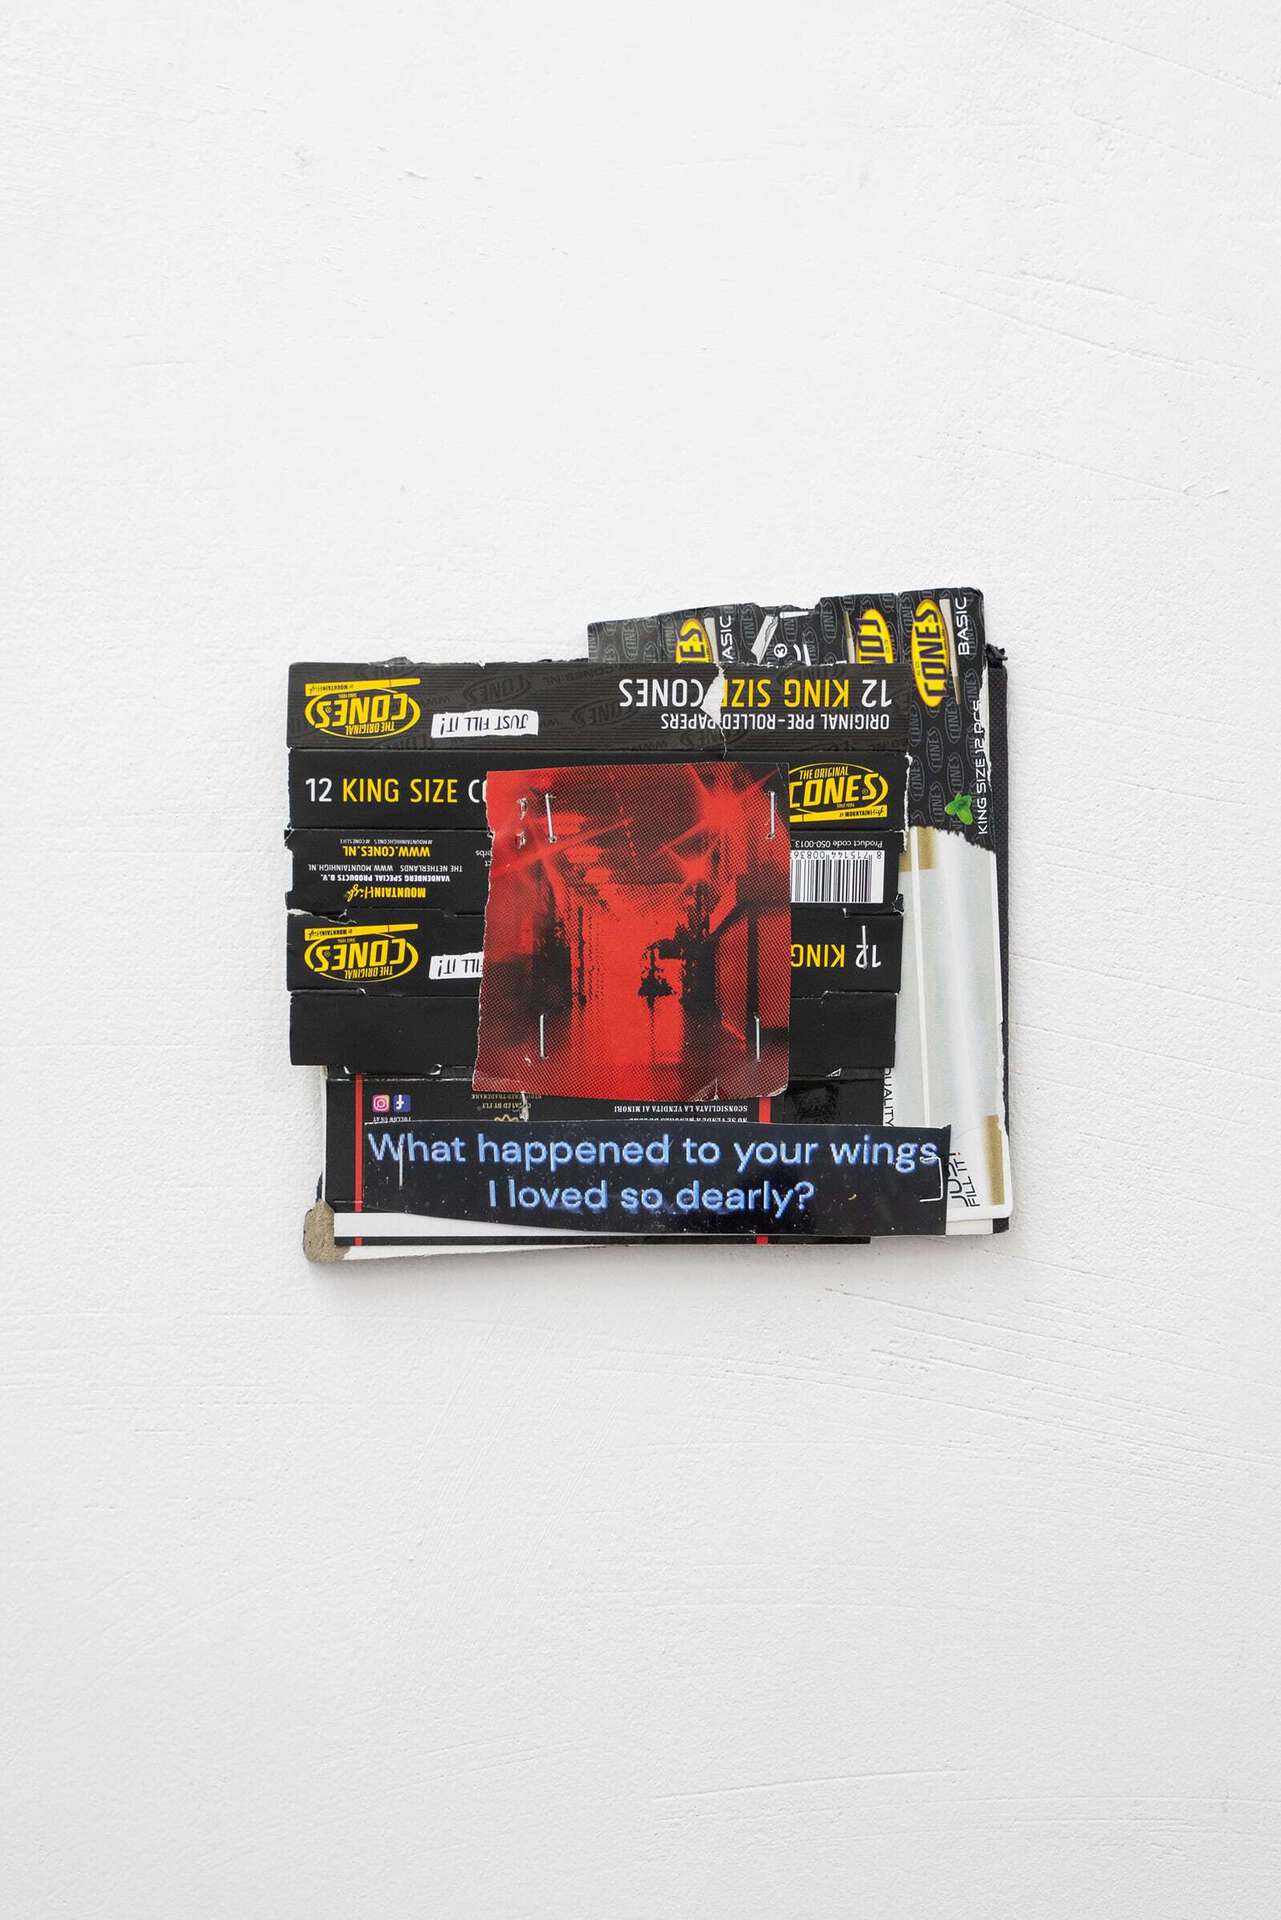 Victor Vejle, In the ward, 2021, cut out, bandage, lipstick, glue and acryl on book cover, 10 x 16 cm